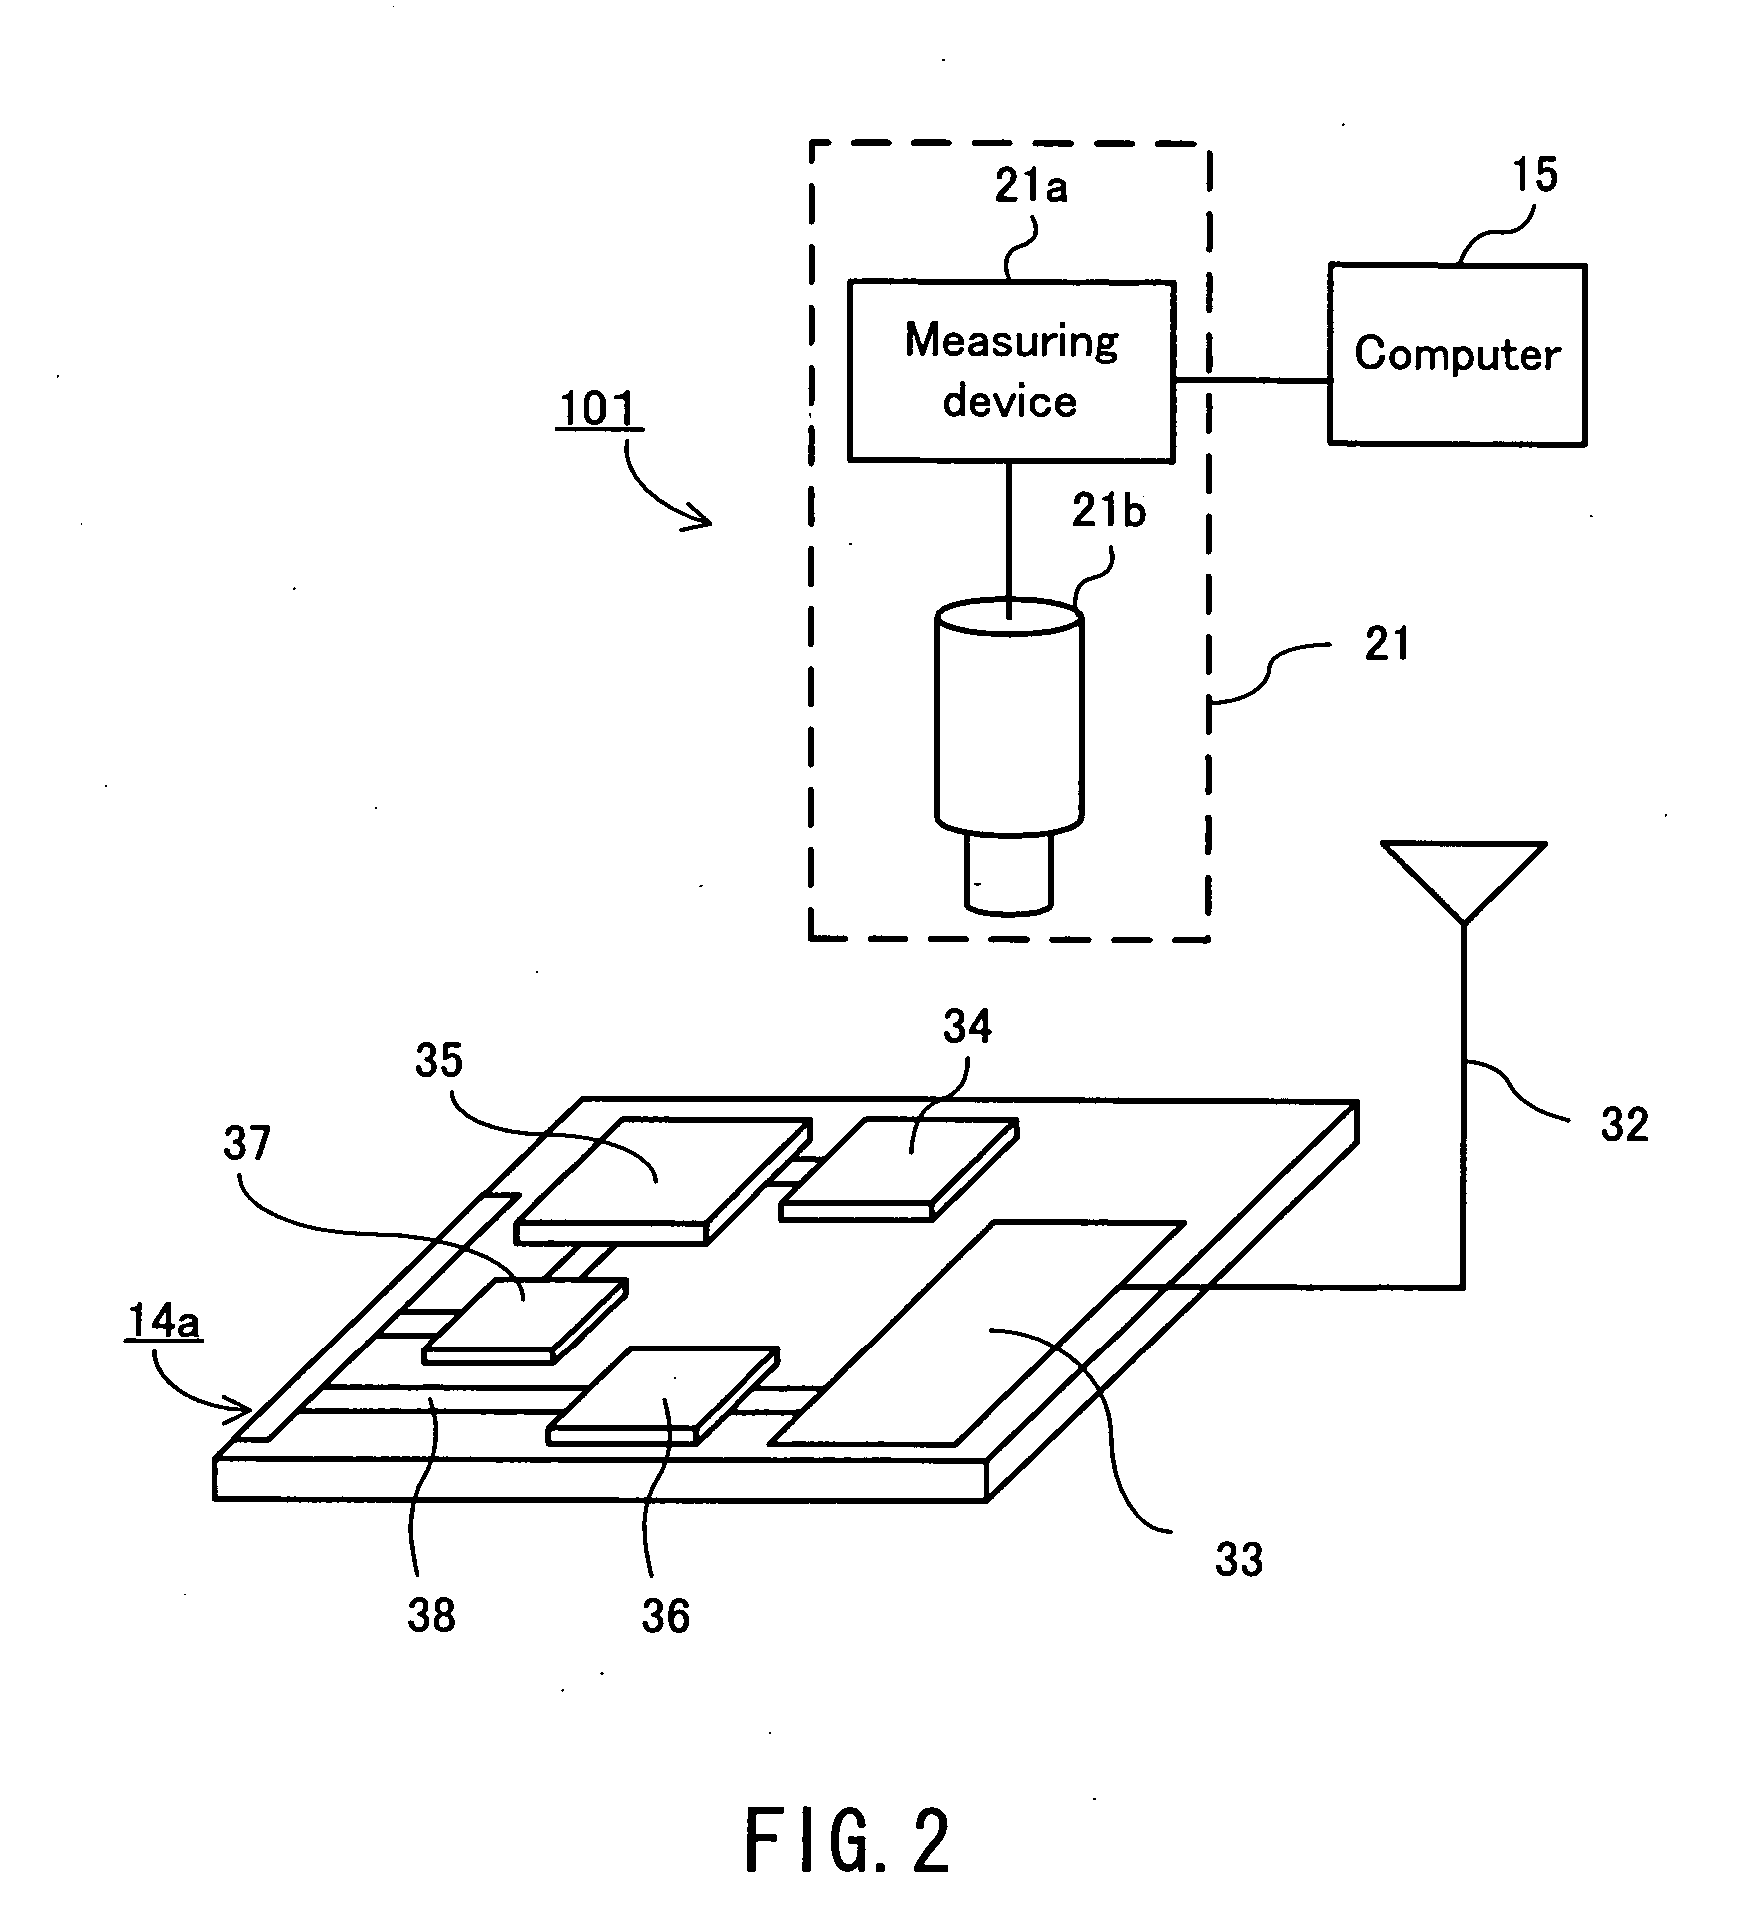 Electromagnetic wave analysis apparatus and design support apparatus